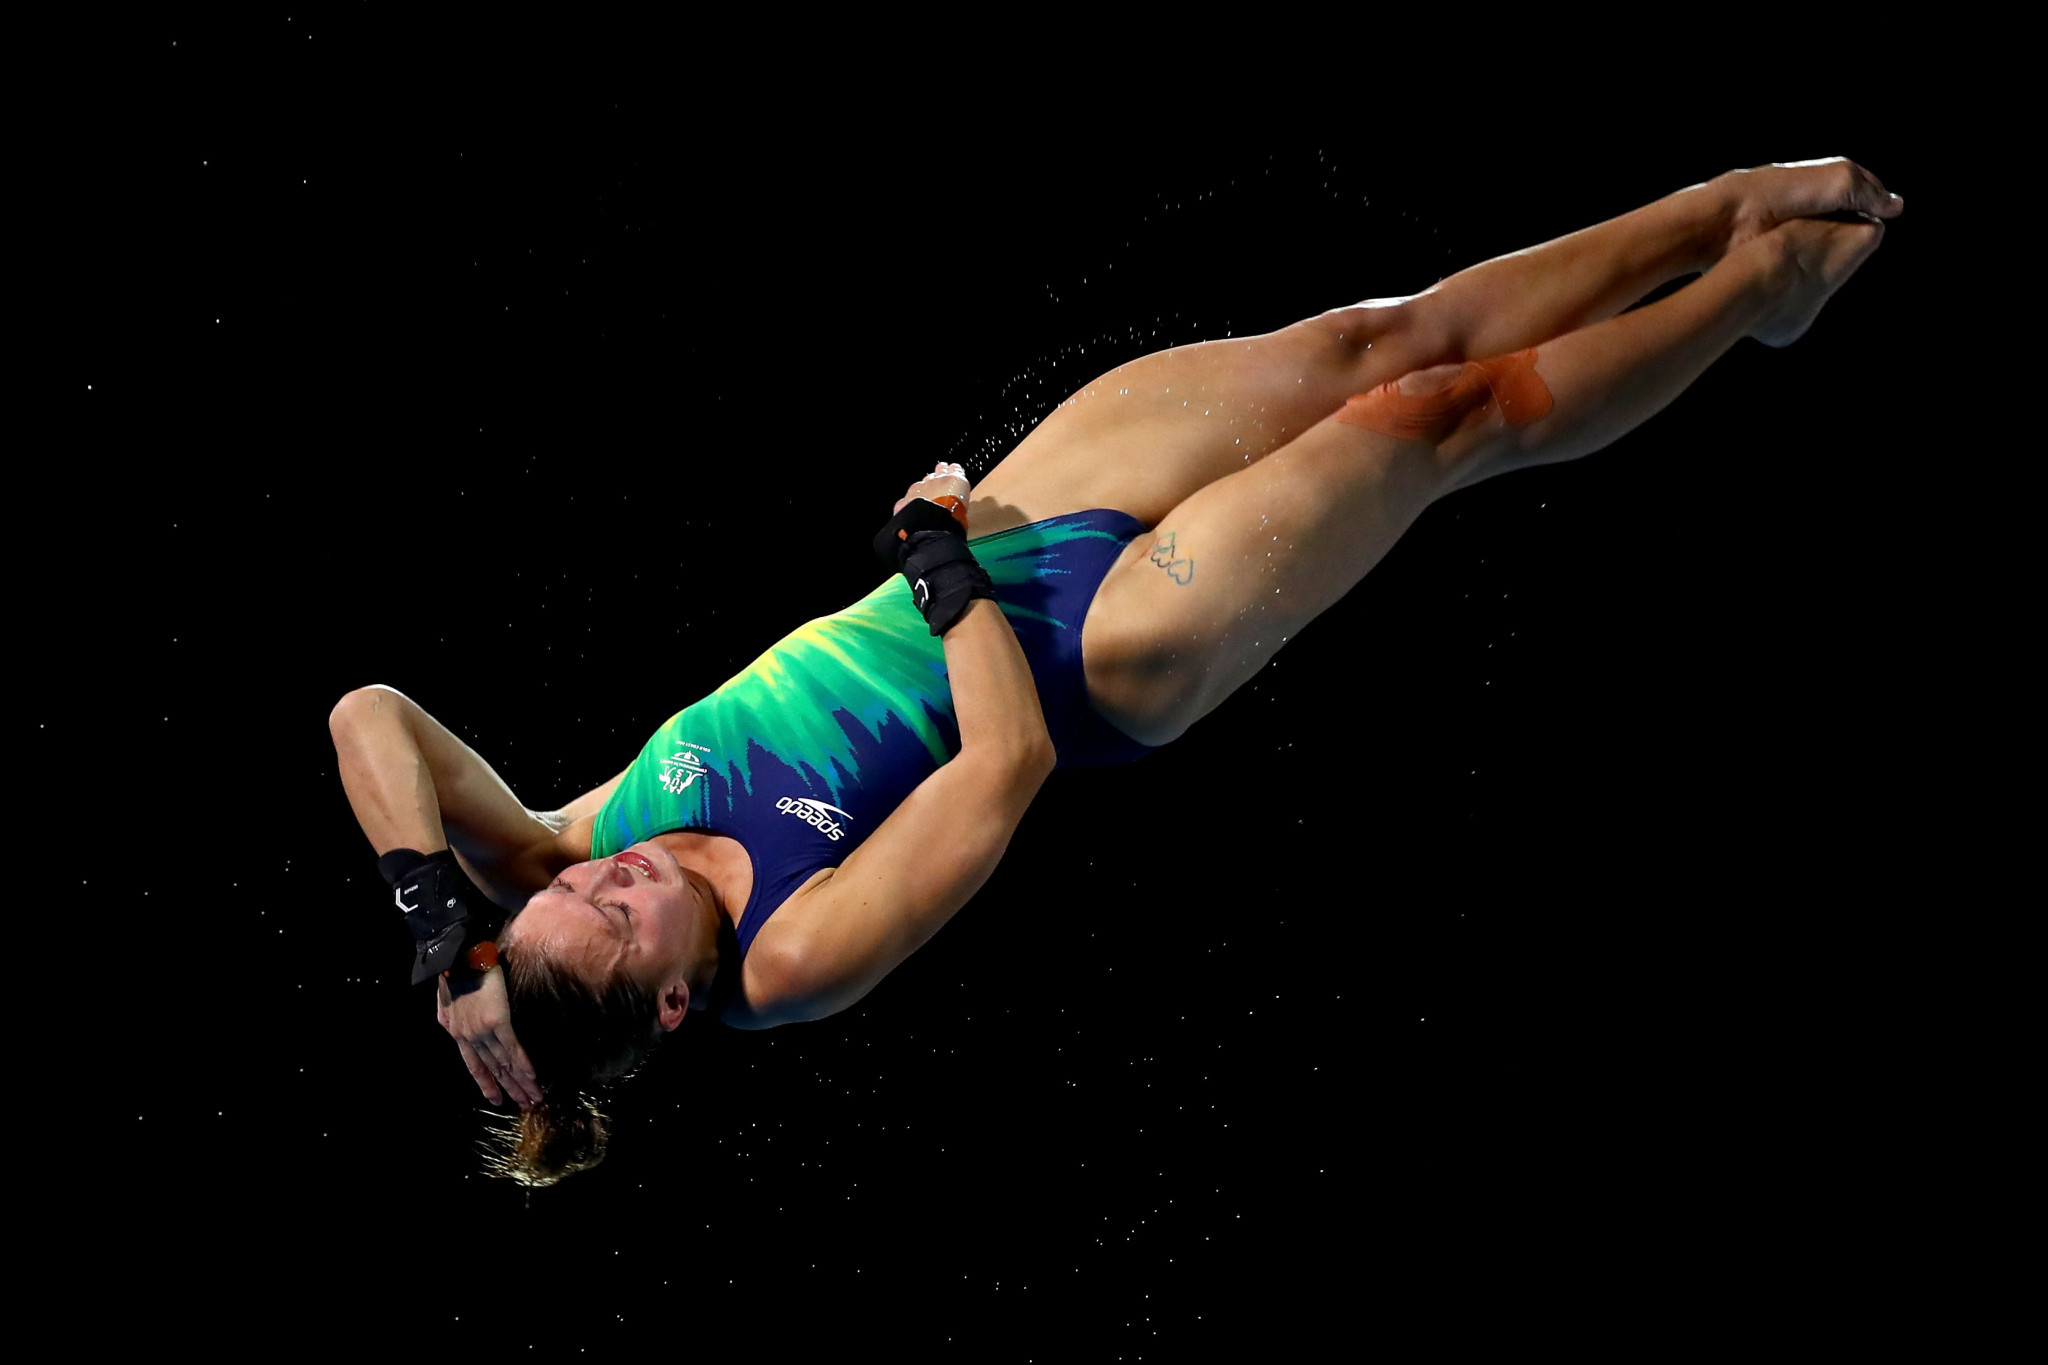 Australia's Melissa Wu earned women's platform gold at the FINA Diving Grand Prix in Mission Viejo in California ©Getty Images